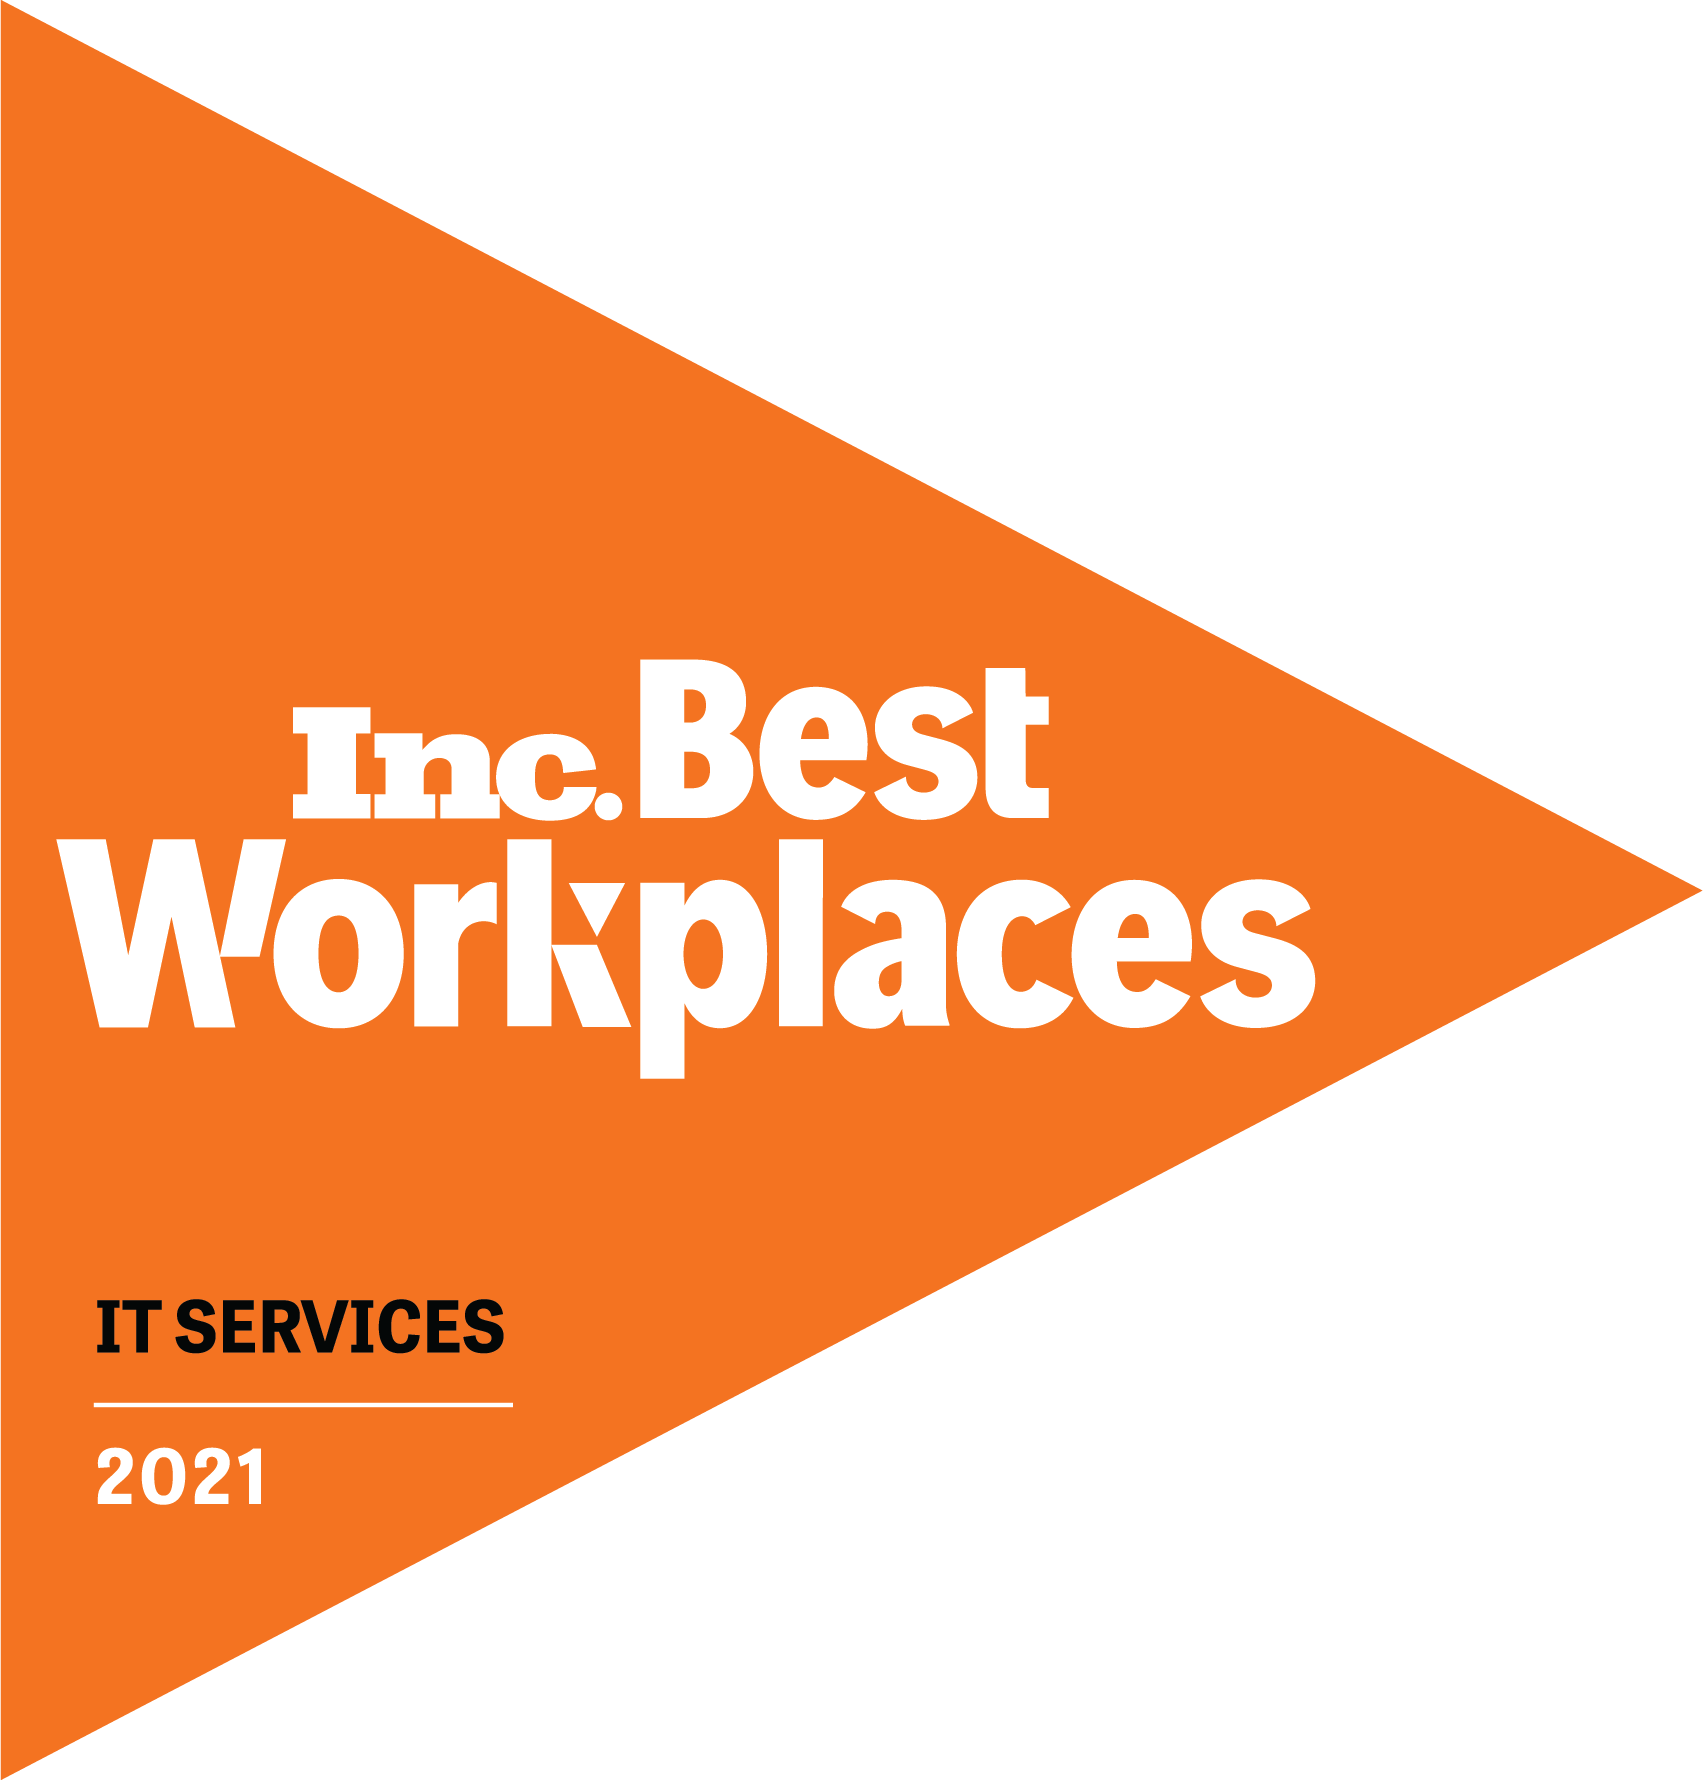 For the second consecutive year, Coastal Cloud, a provider of consulting, implementation and managed services, has been named to Inc. Magazine’s annual list of Best Workplaces.